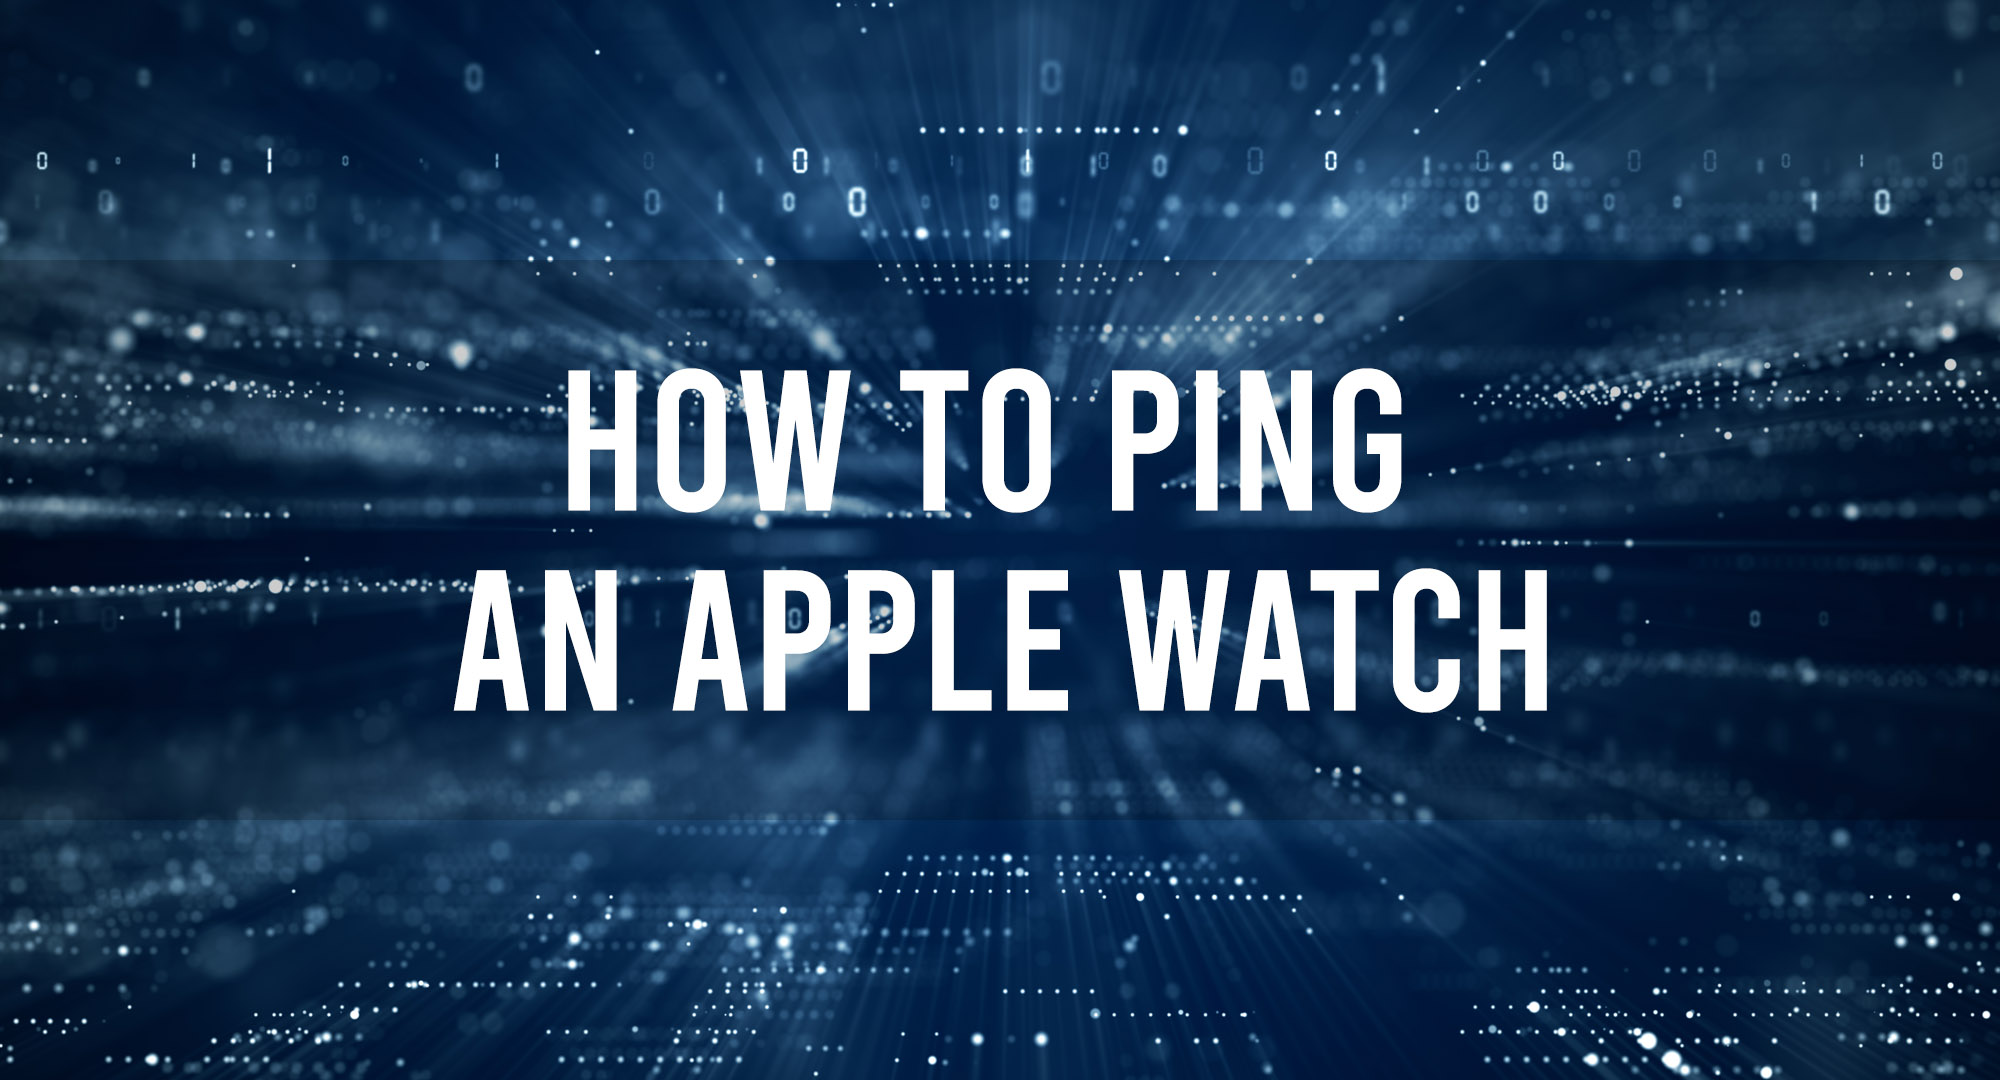 How to ping an apple watch